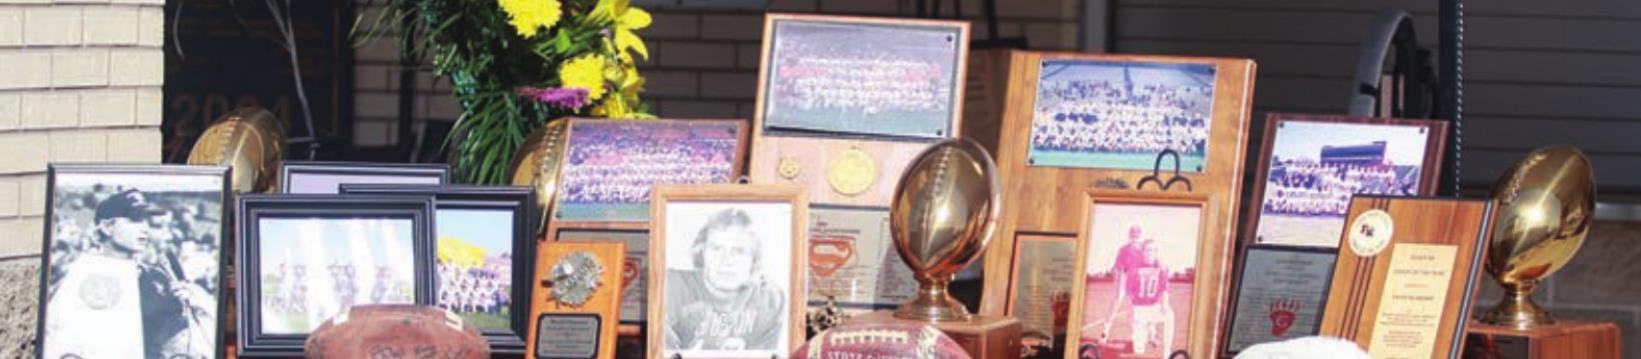 A display outside the gym included trophies, photos, and memorabilia from coach Husmann’s days at the University of Houston as well as his coaching career. Sticker Photo By Darrell Vyvjala